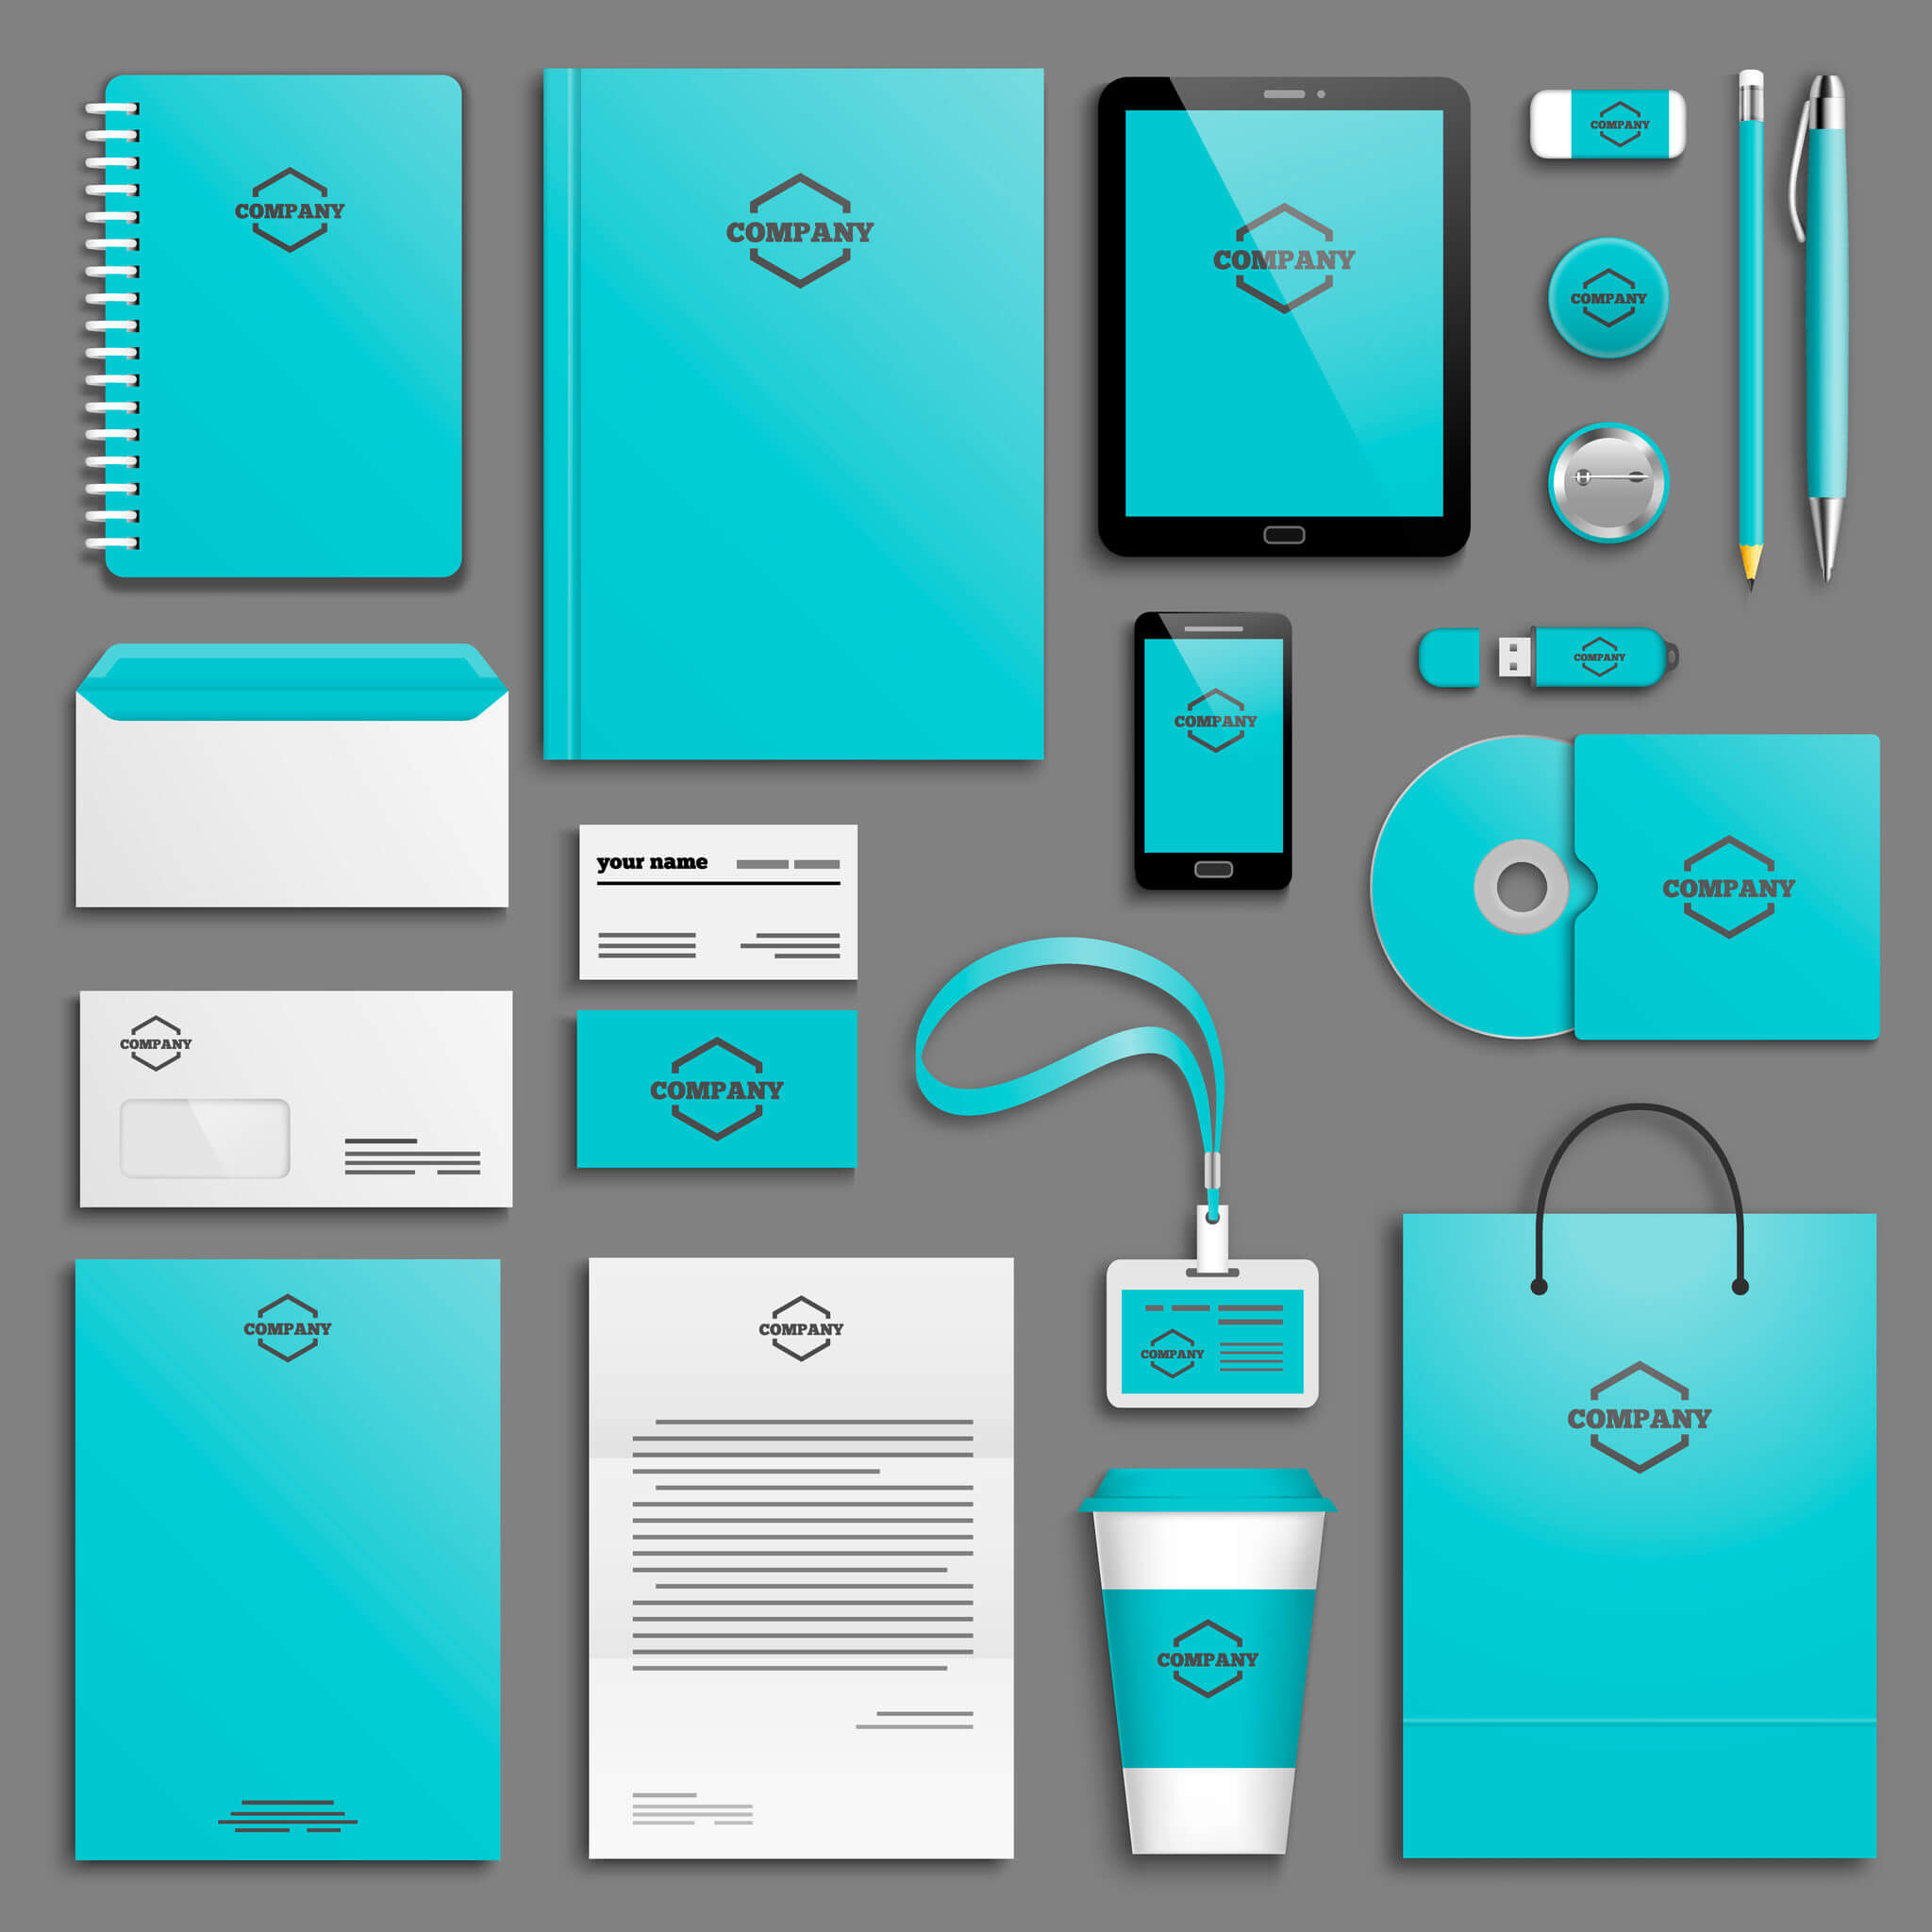 Business stationery mock-up with icon. branding design.